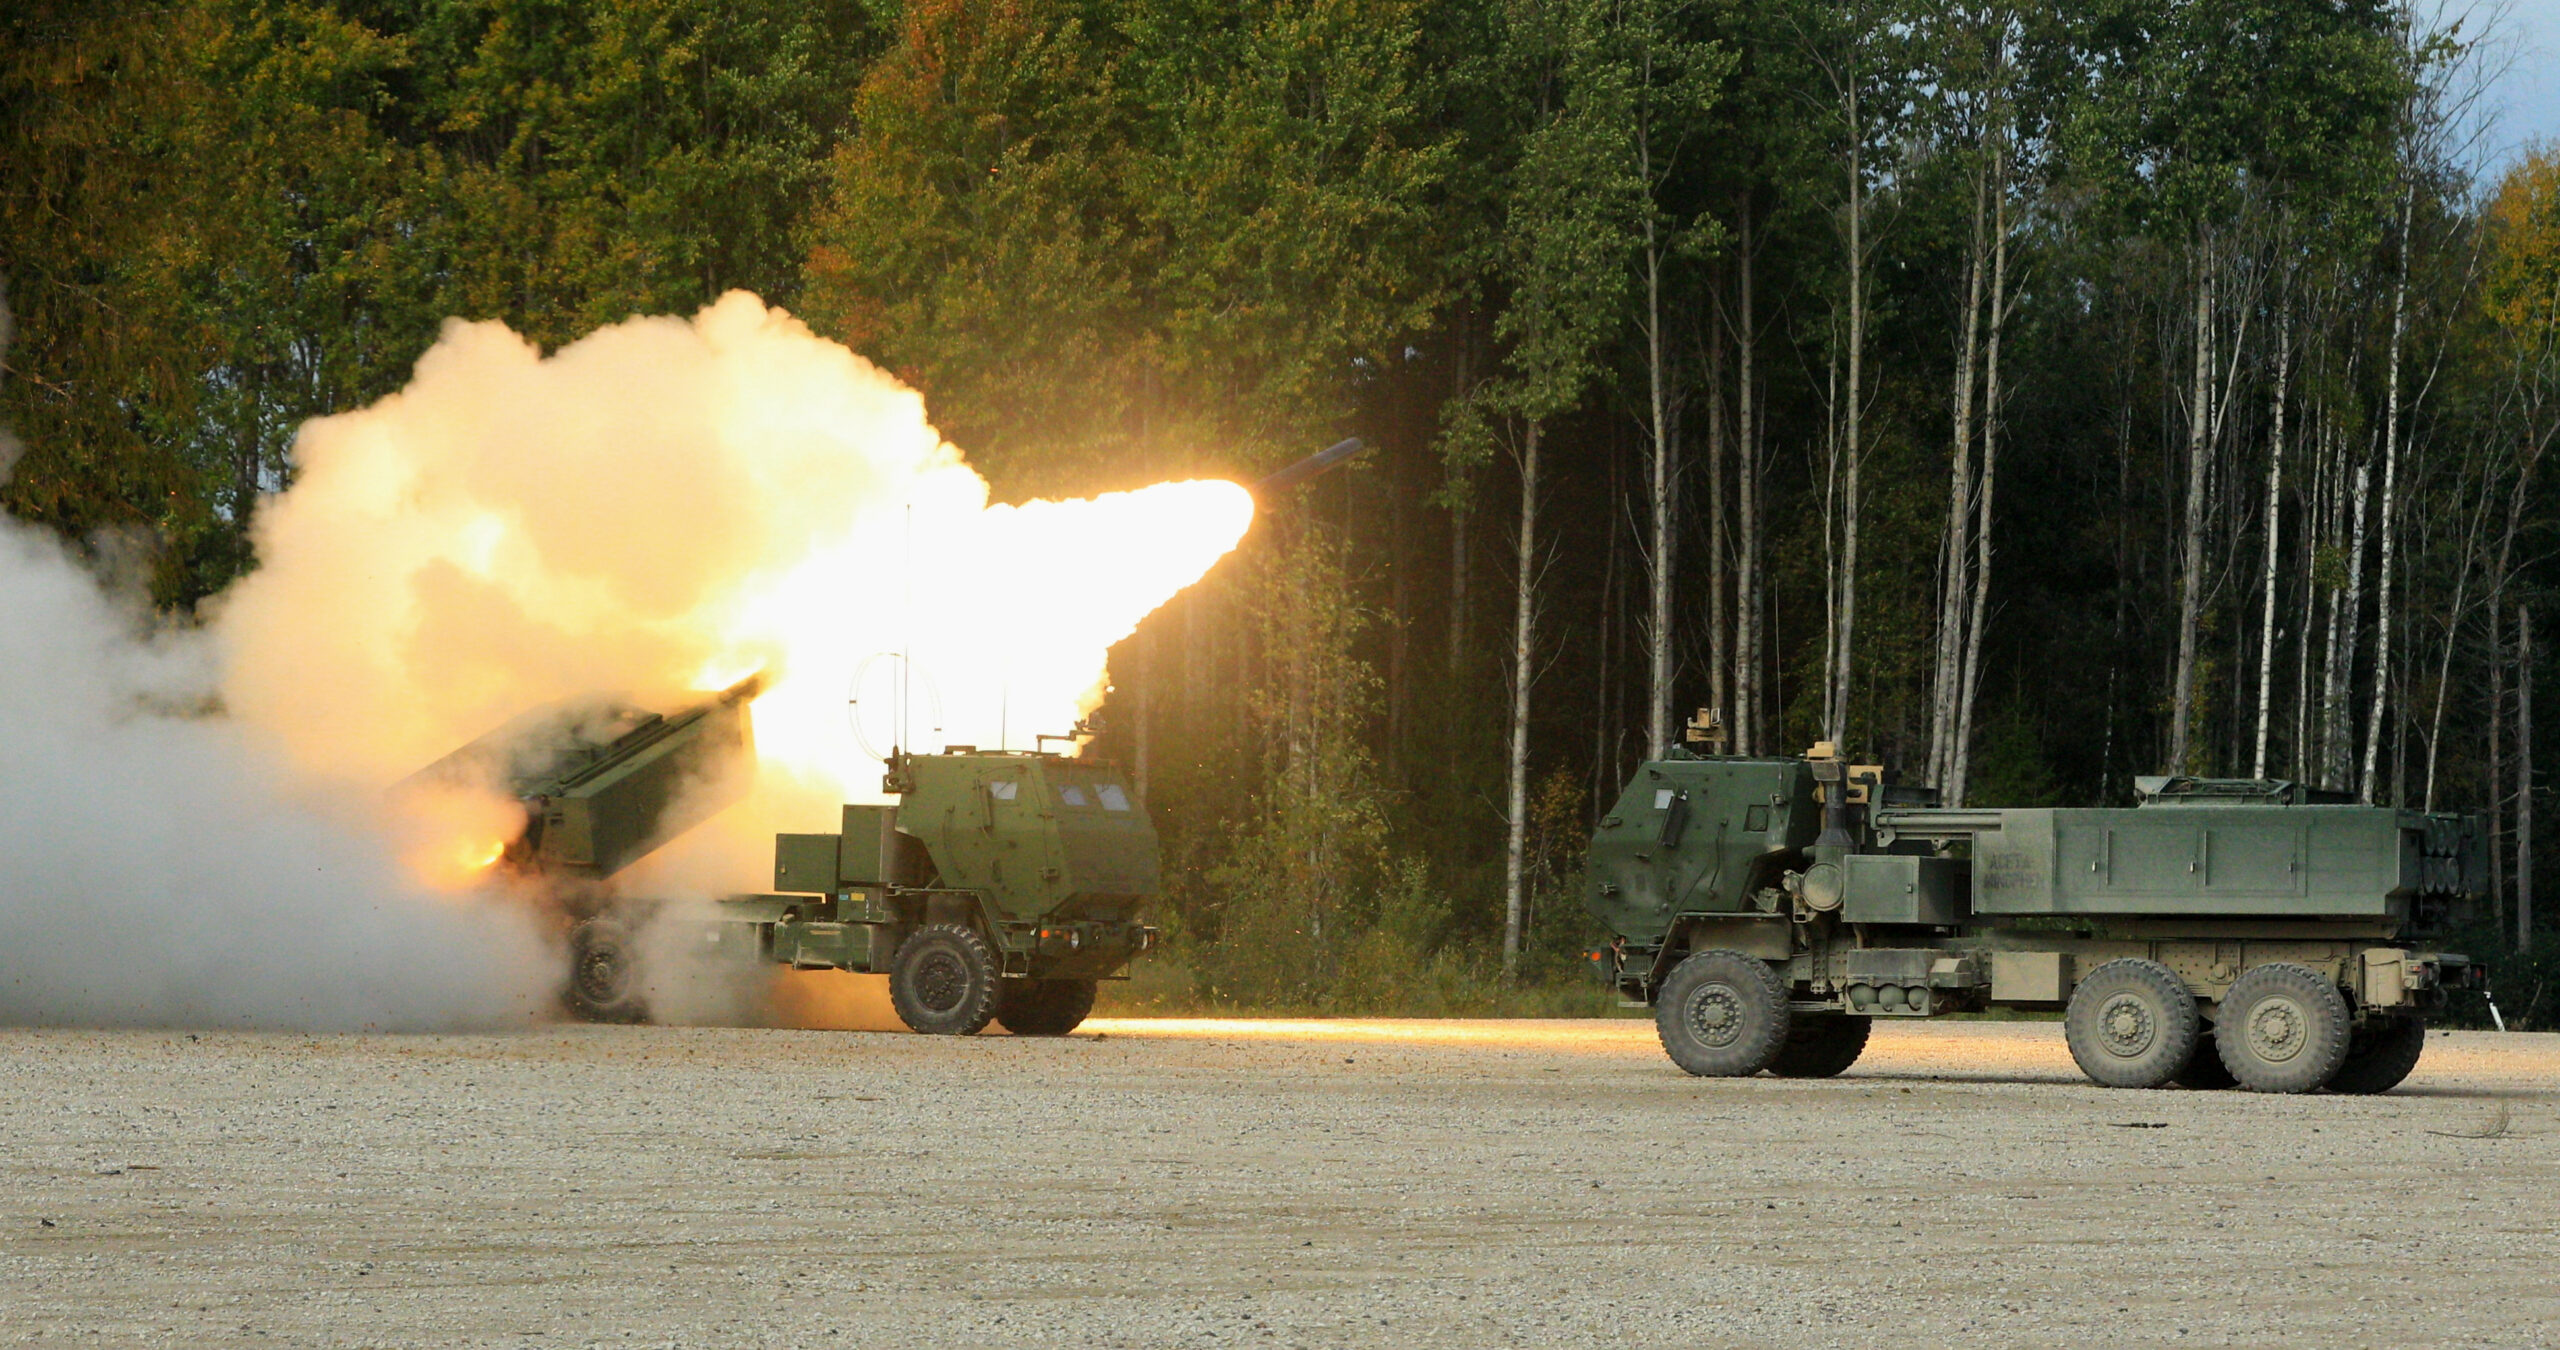 U.S. Soldiers assigned to 3rd Battalion, 27th Field Artillery Regiment, 18th Field Artillery Brigade, 82nd Airborne Division, supporting 3rd Infantry Division, demonstrate M142 High Mobility Artillery Rocket System (HIMARS) operations to NATO’s enhanced Forward Presence Battle Group Estonia allies during a live-fire exercise at Estonian Central Training Area​, Estonia, Sept. 27, 2023. The 3rd Infantry Division’s mission in Europe is to engage in multinational training and exercises across the continent, working alongside NATO allies and regional security partners to provide combat-credible forces to V Corps, America’s forward deployed corps in Europe. (U.S. Army photo by Sgt. Cesar Salazar Jr.)